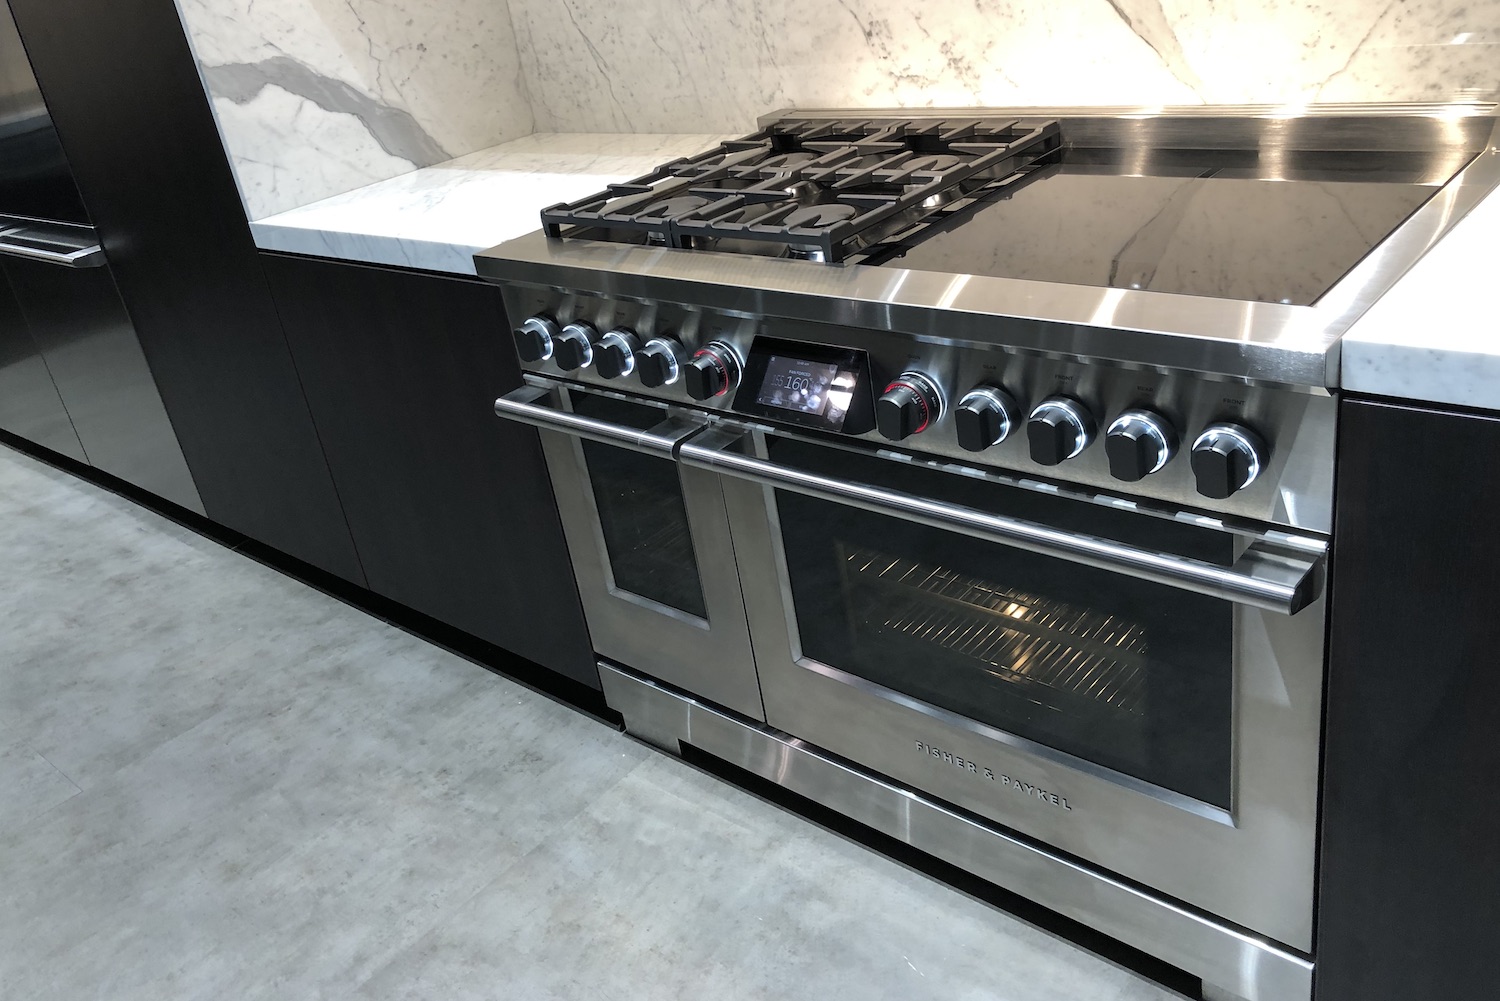 https://www.digitaltrends.com/wp-content/uploads/2019/02/fisher-and-paykel-dual-fuel-range.jpg?fit=720%2C480&p=1